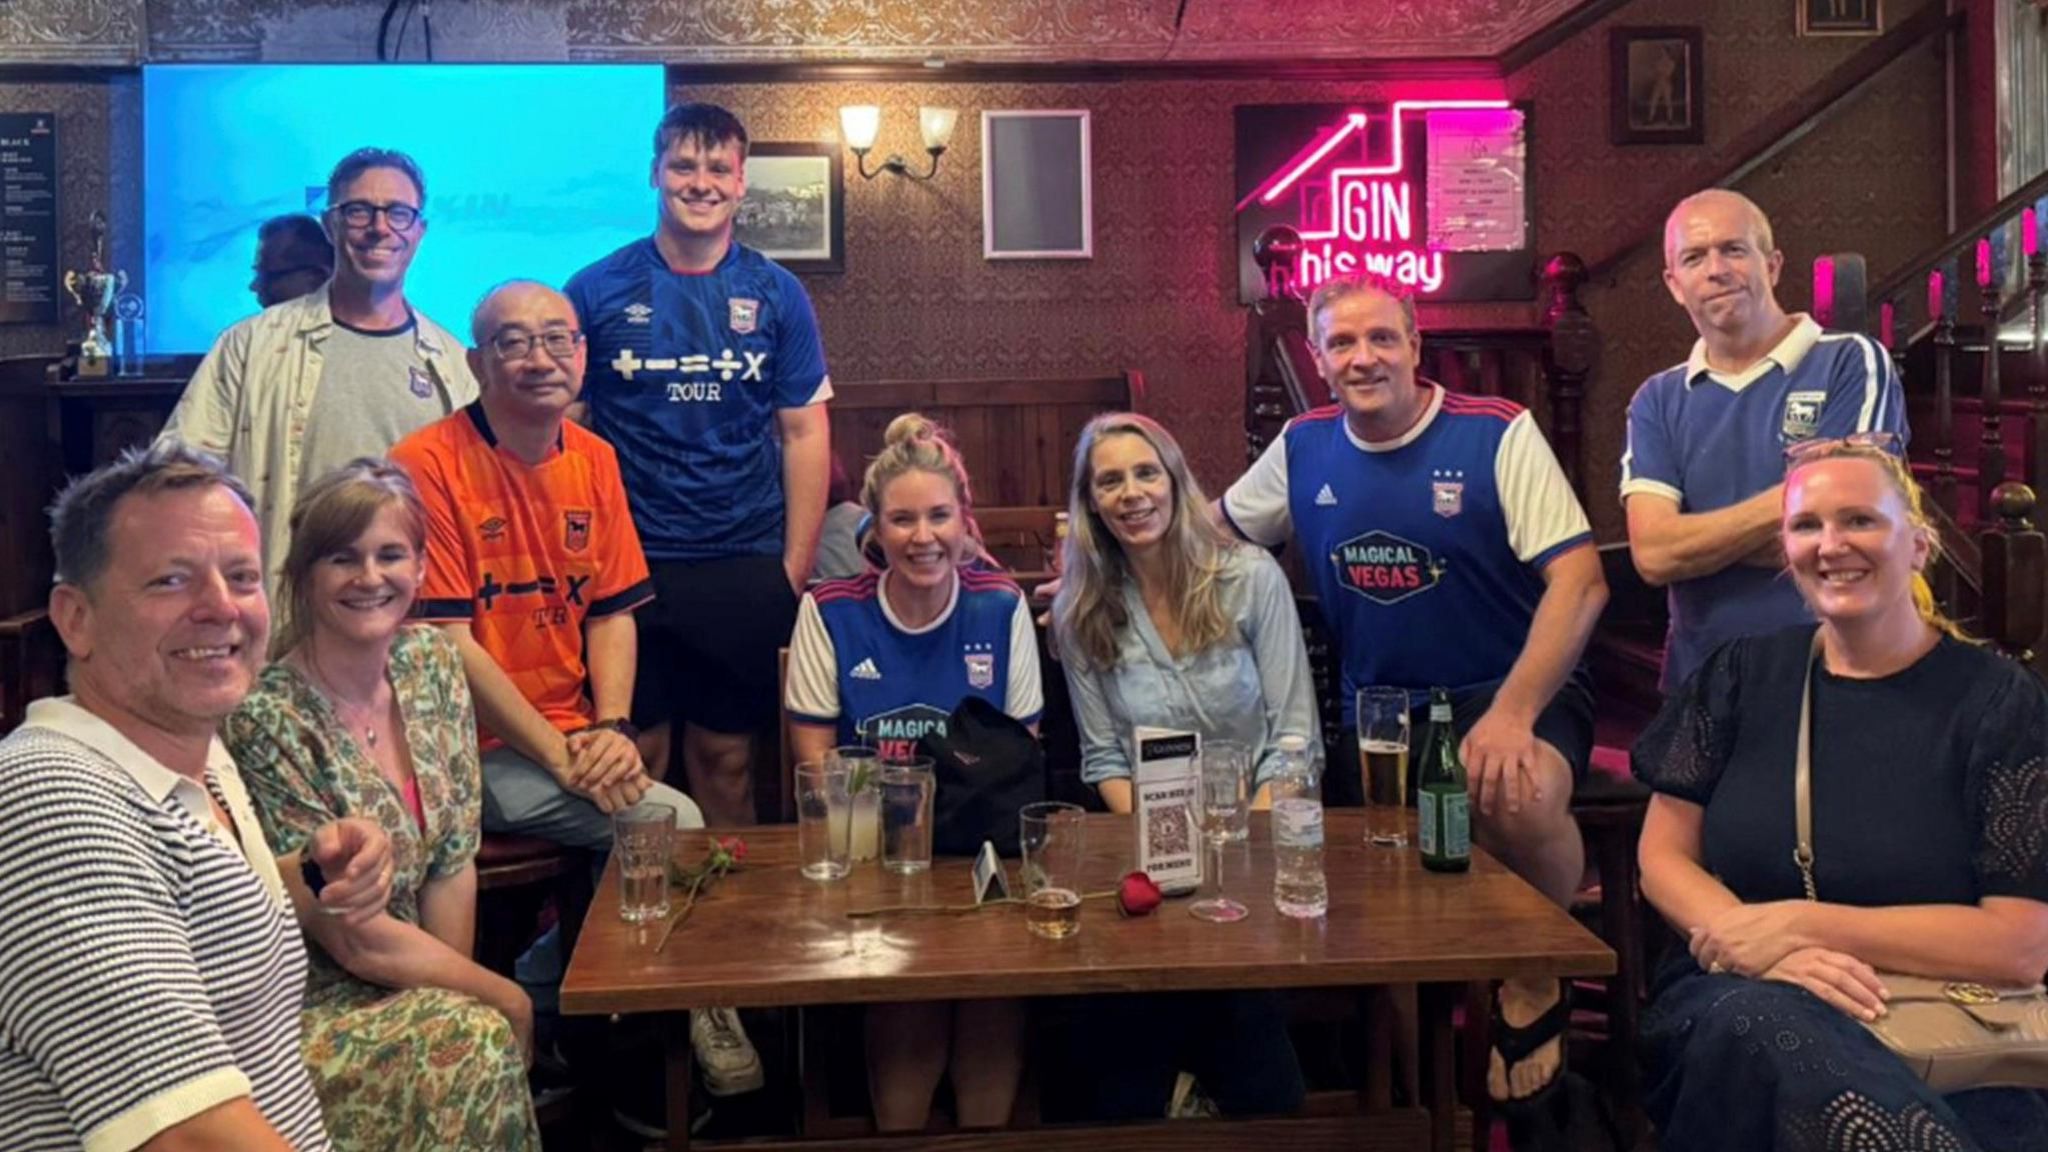 Ten football fans - several wearing Ipswich Town replica shirts - crowded around a table in a bar